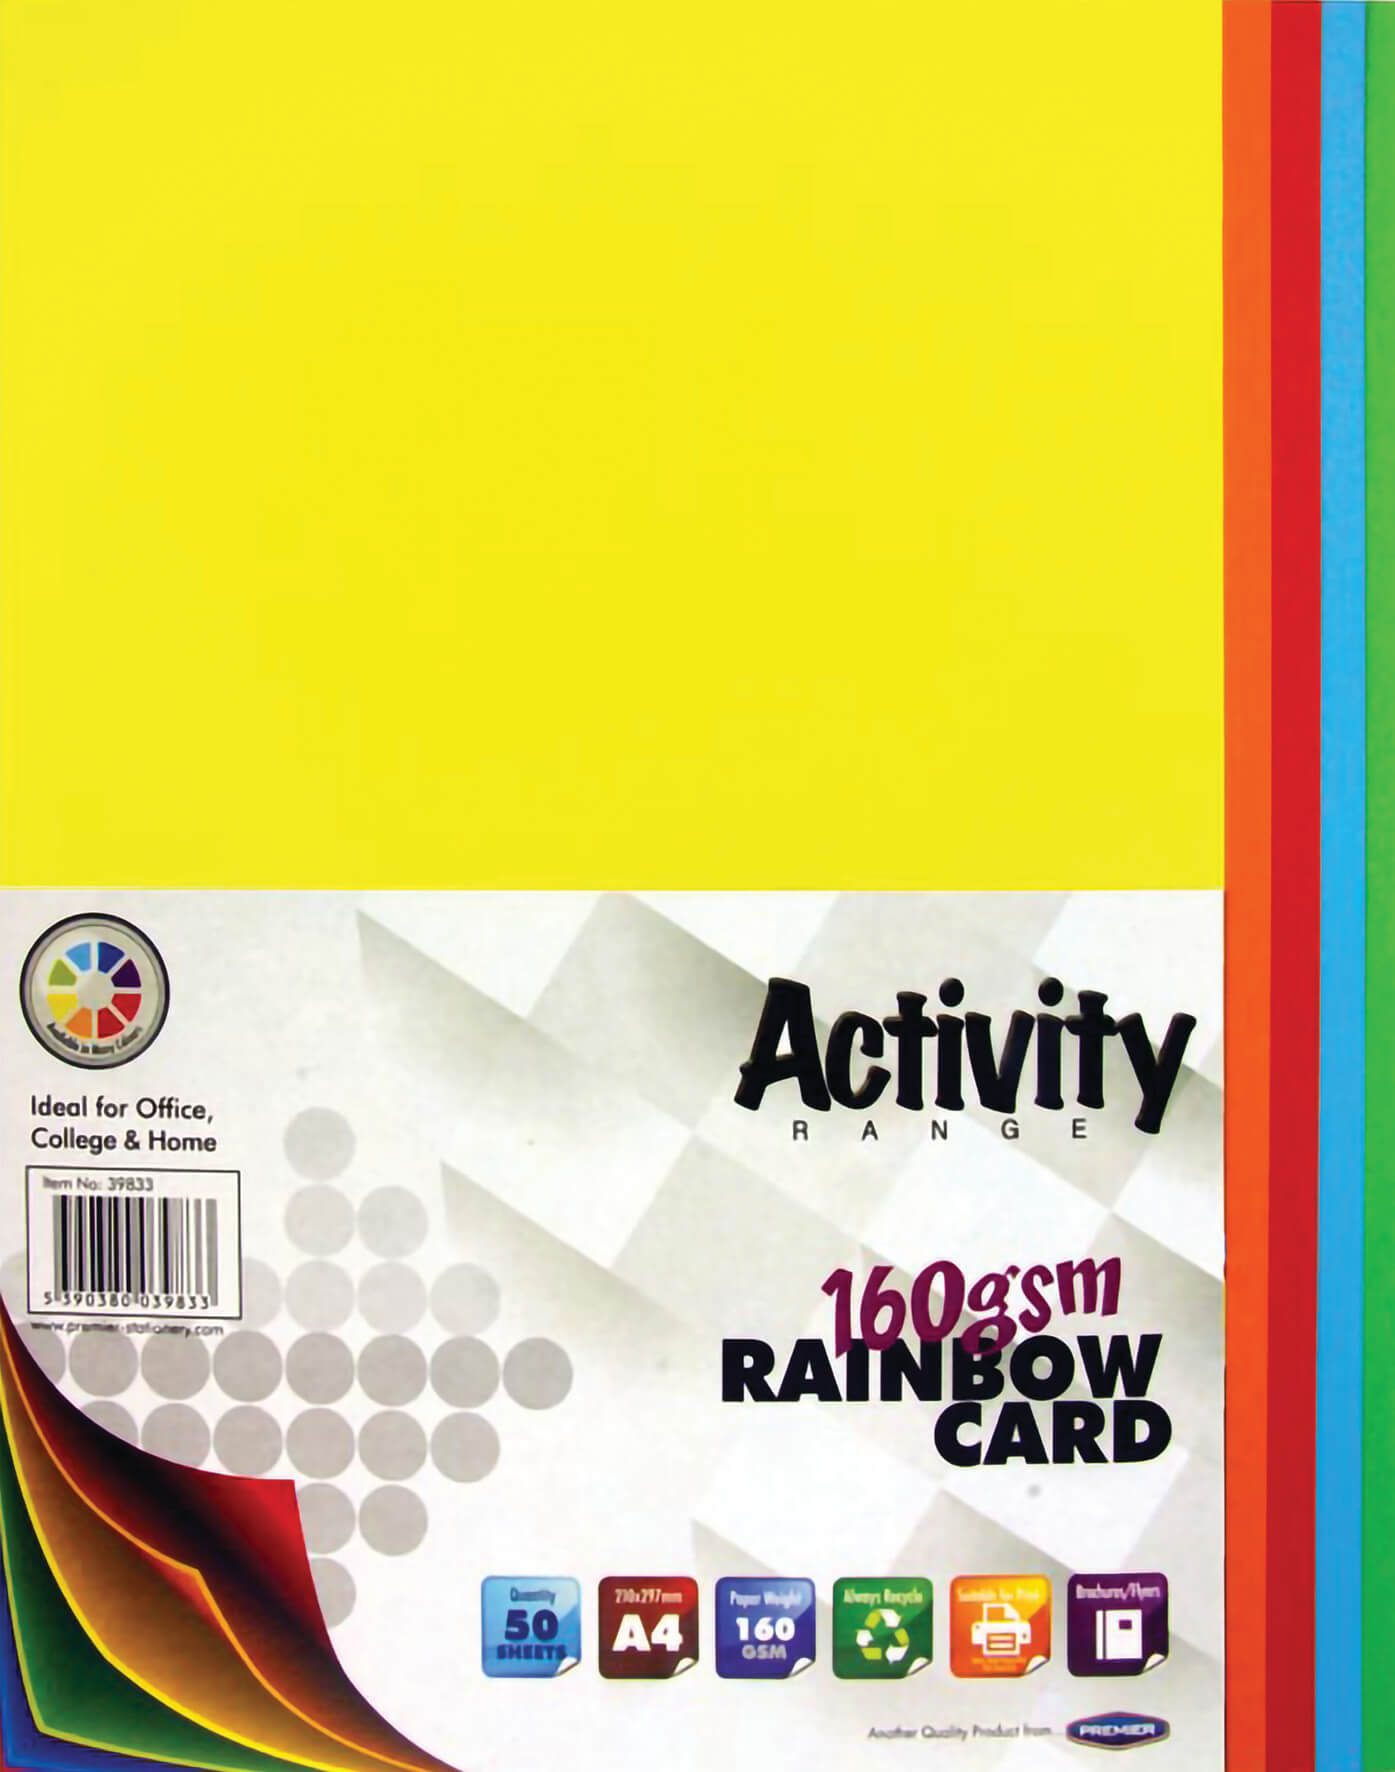 Card Rainbow A4 160gsm - 50 Sheets